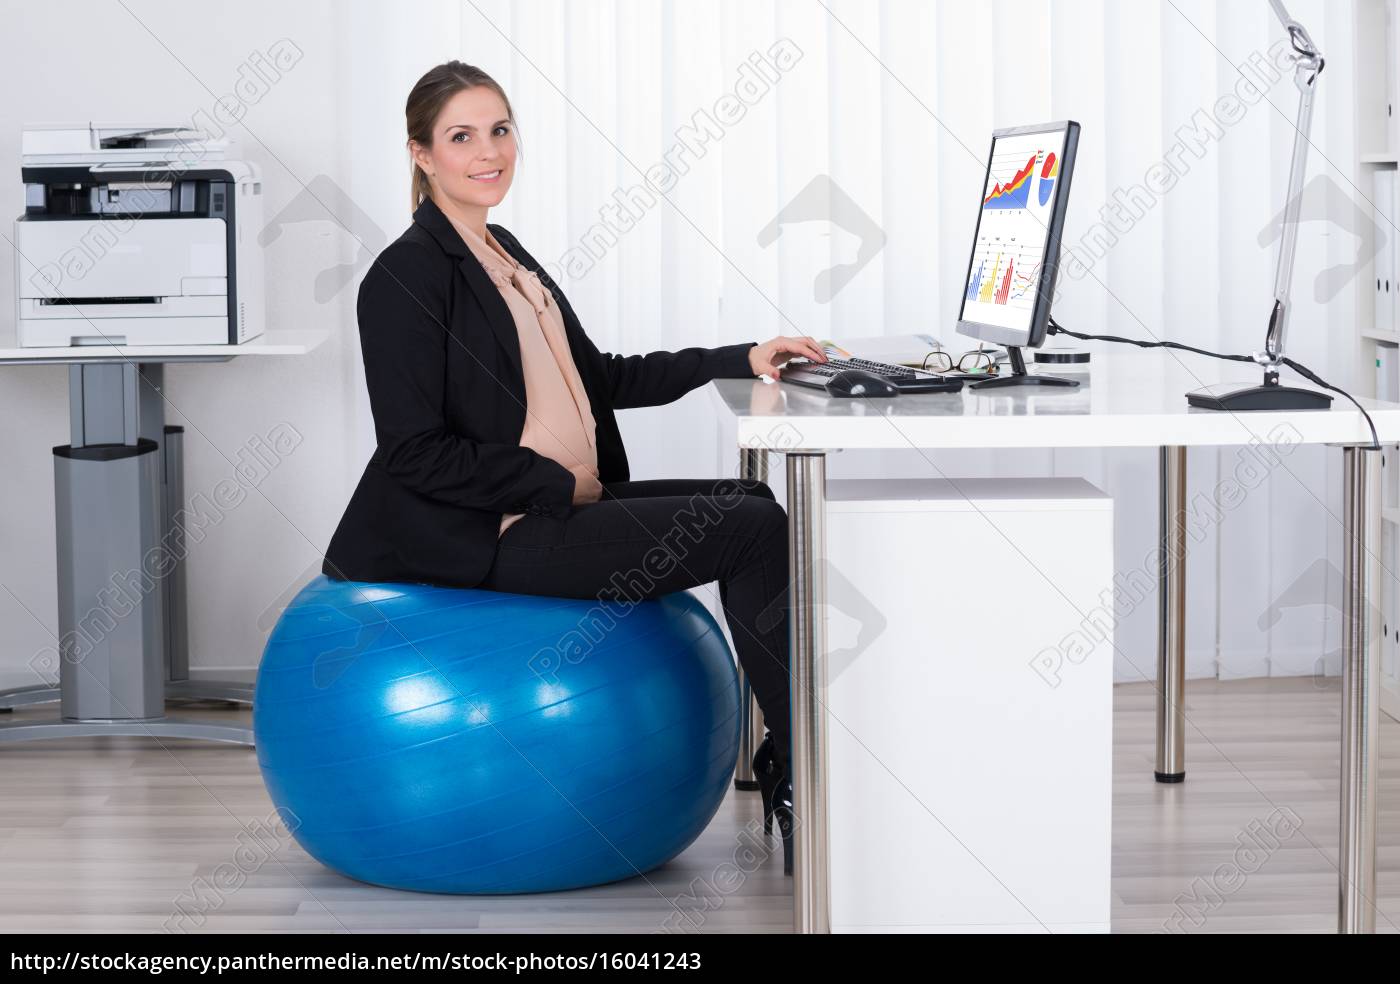 Pregnant Businesswoman Sitting On Fitness Ball Royalty Free